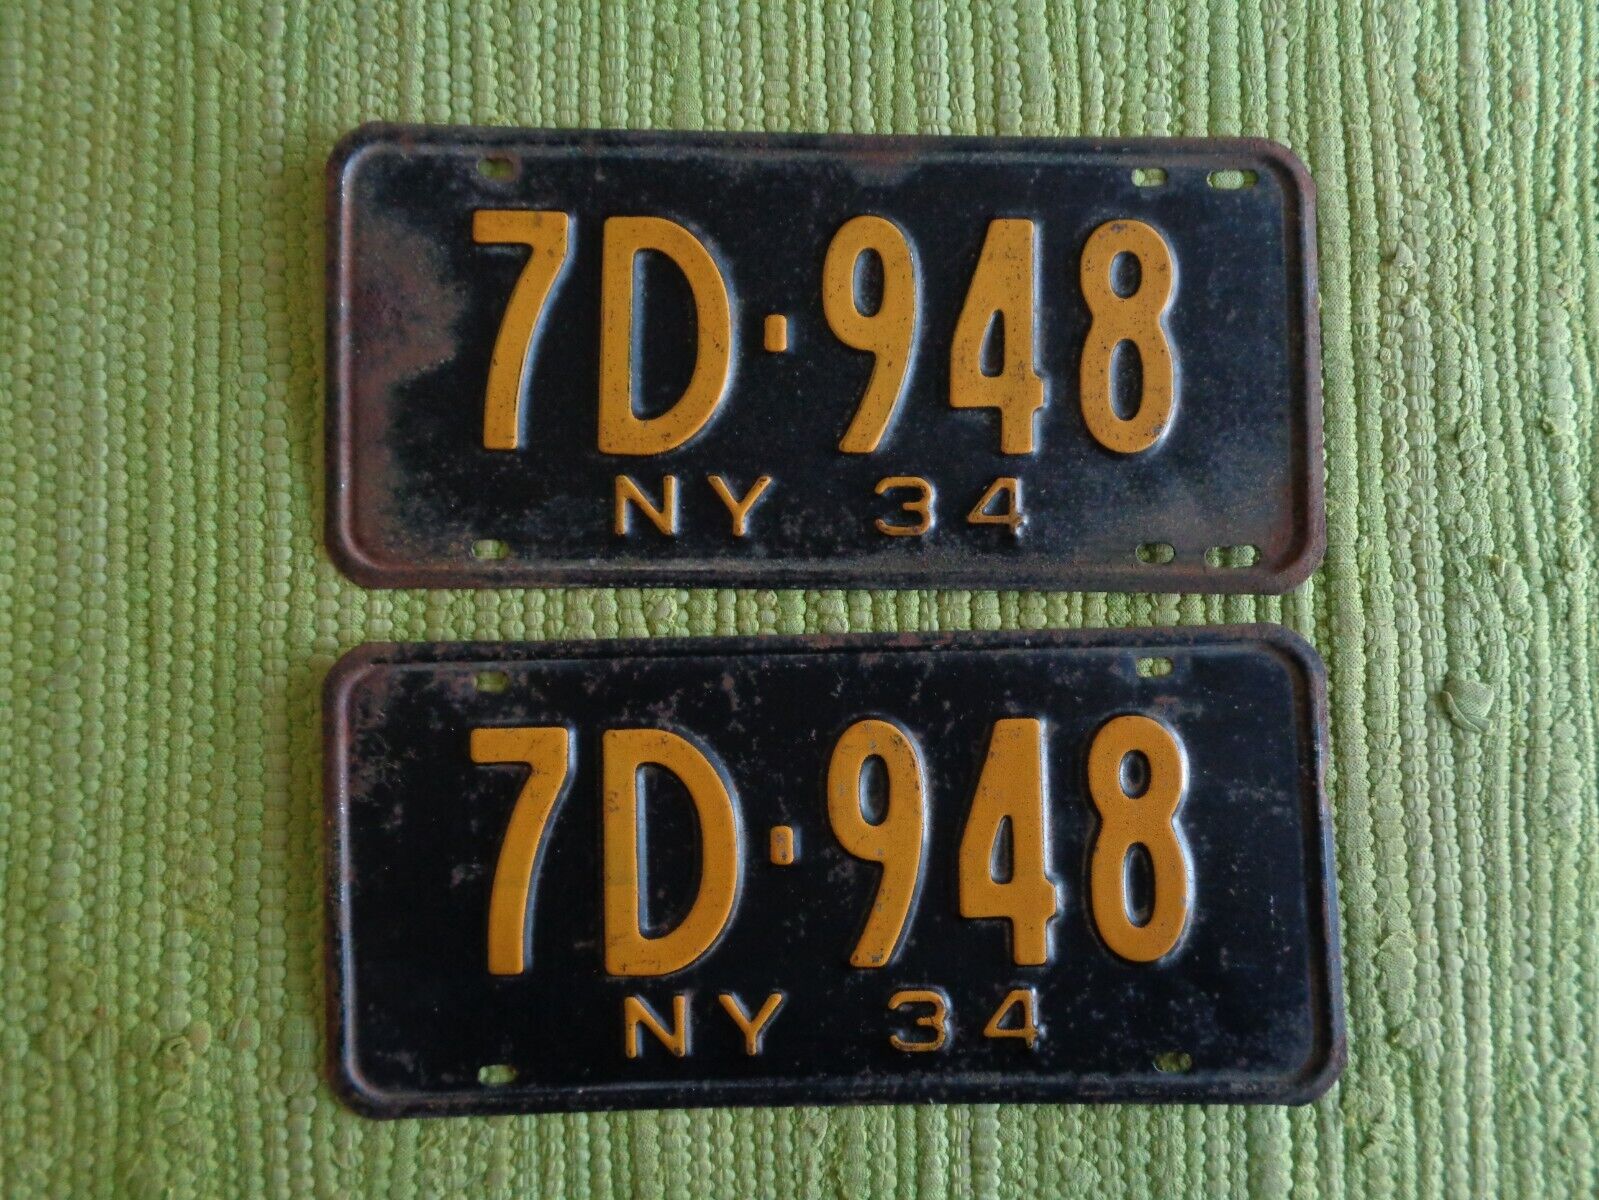 1934 New York License Plate Matched Pair 34 NY Tag 7D-948 Plates